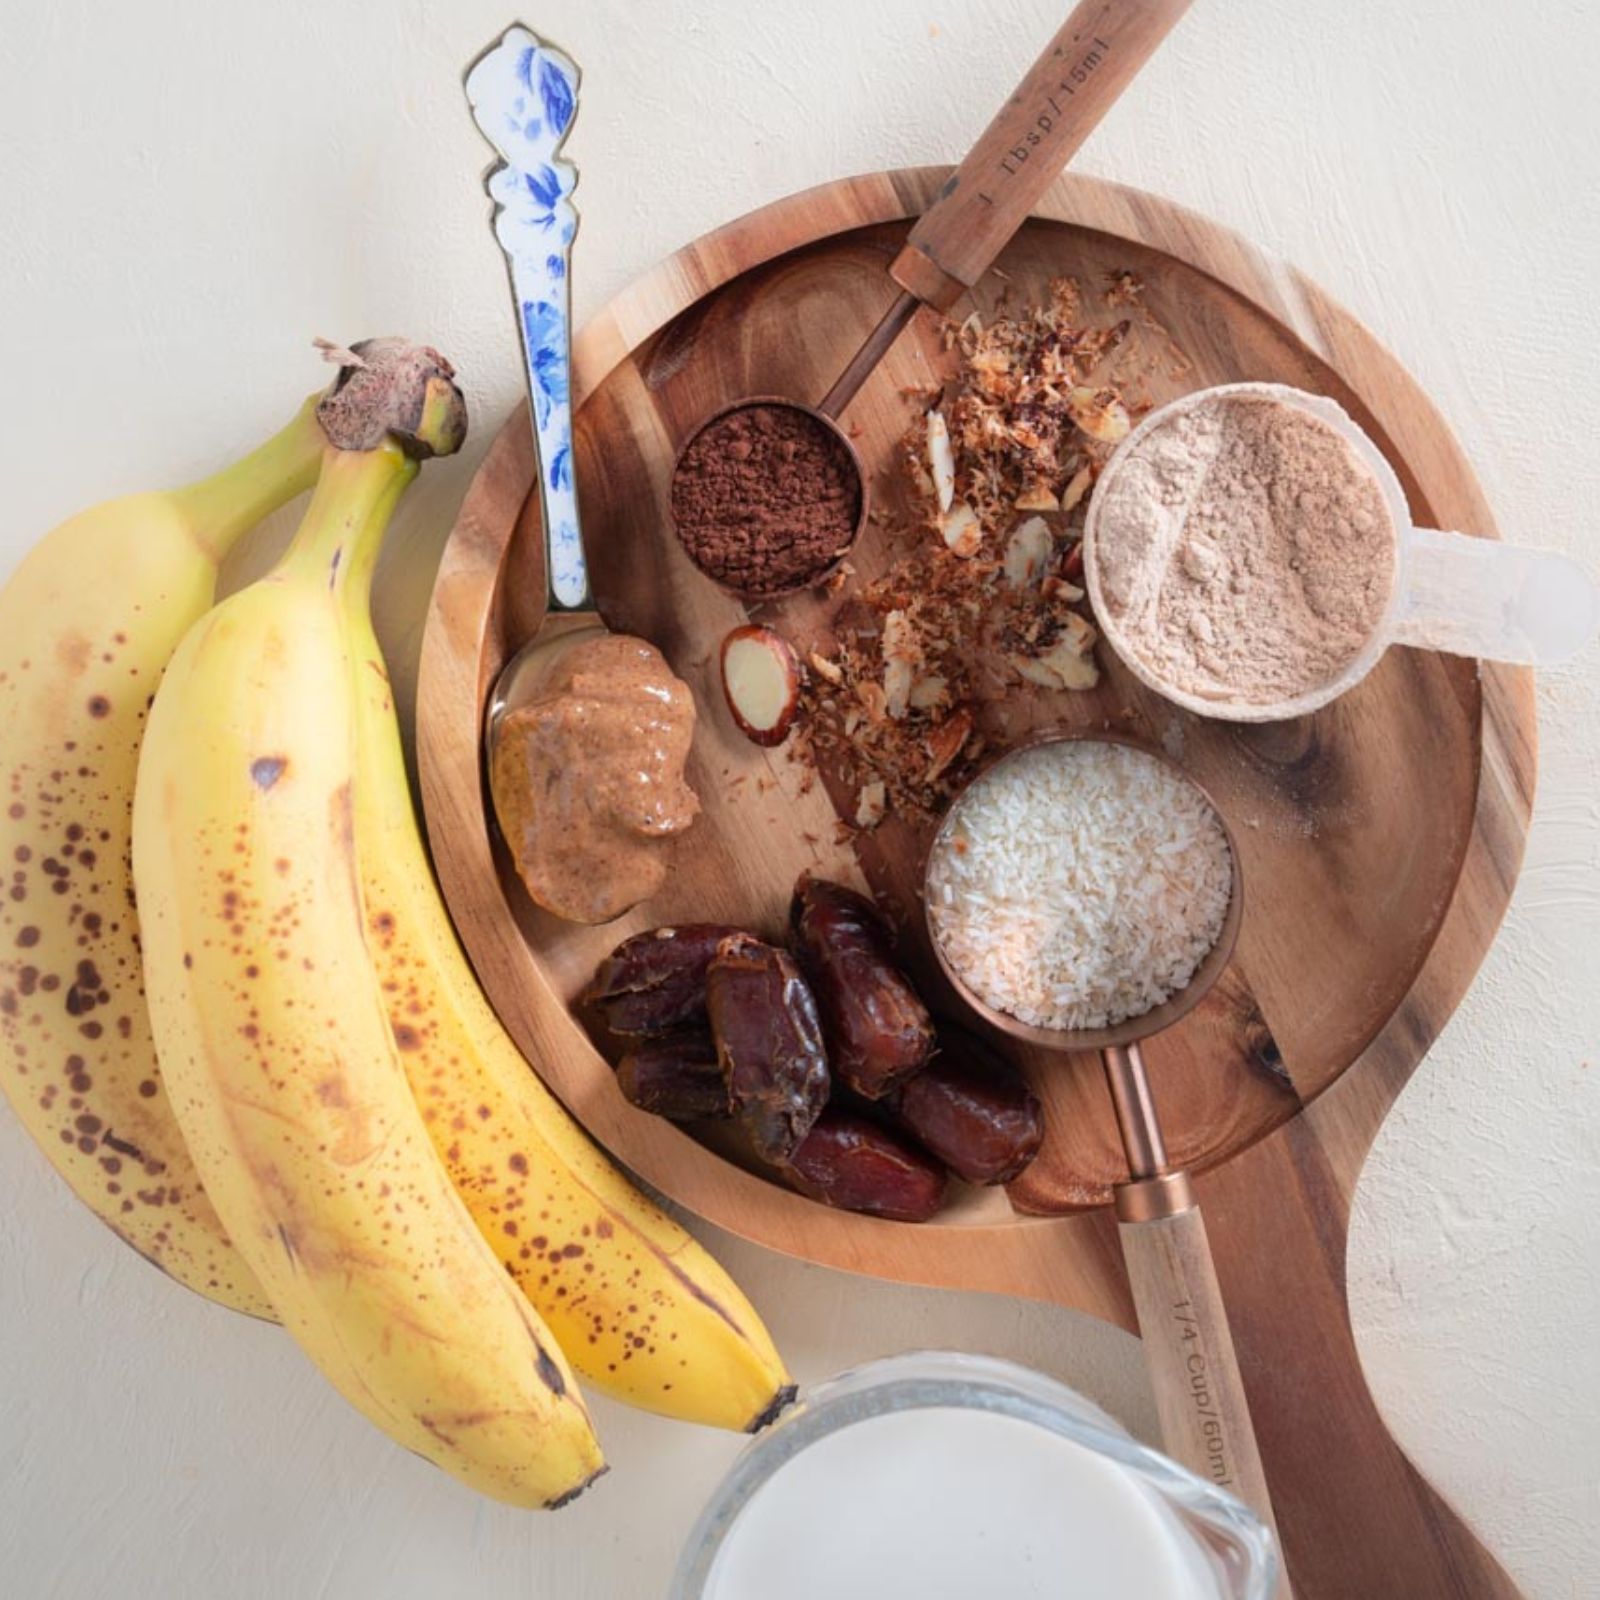 Ingredients for a Smoothie with bananas, nut butters, cocoa powder, protein powder, dates, and nuts